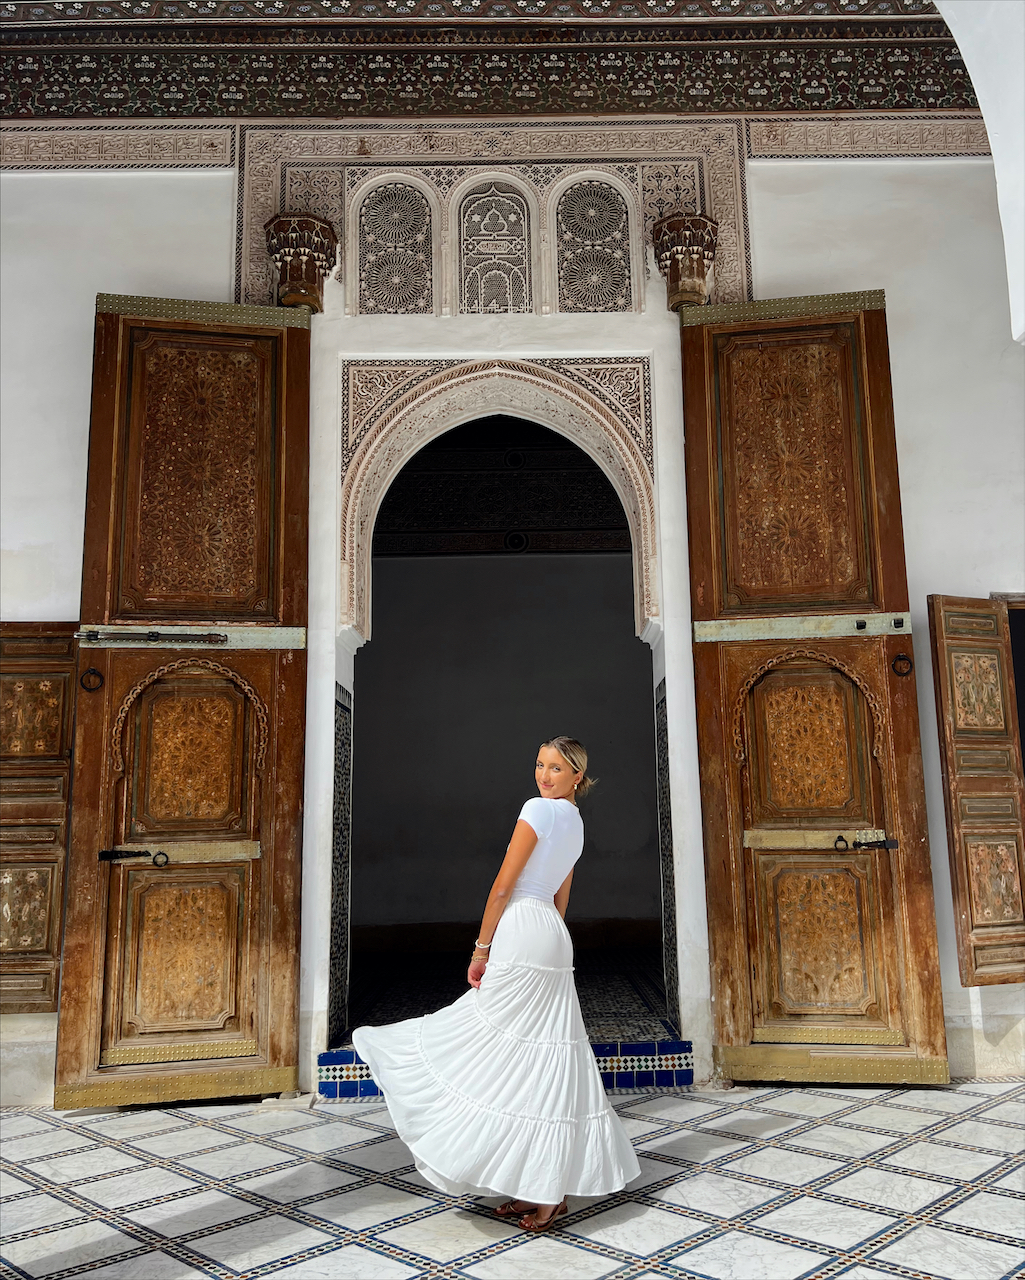 Morocco, Africa Travel Guide Fall 2022